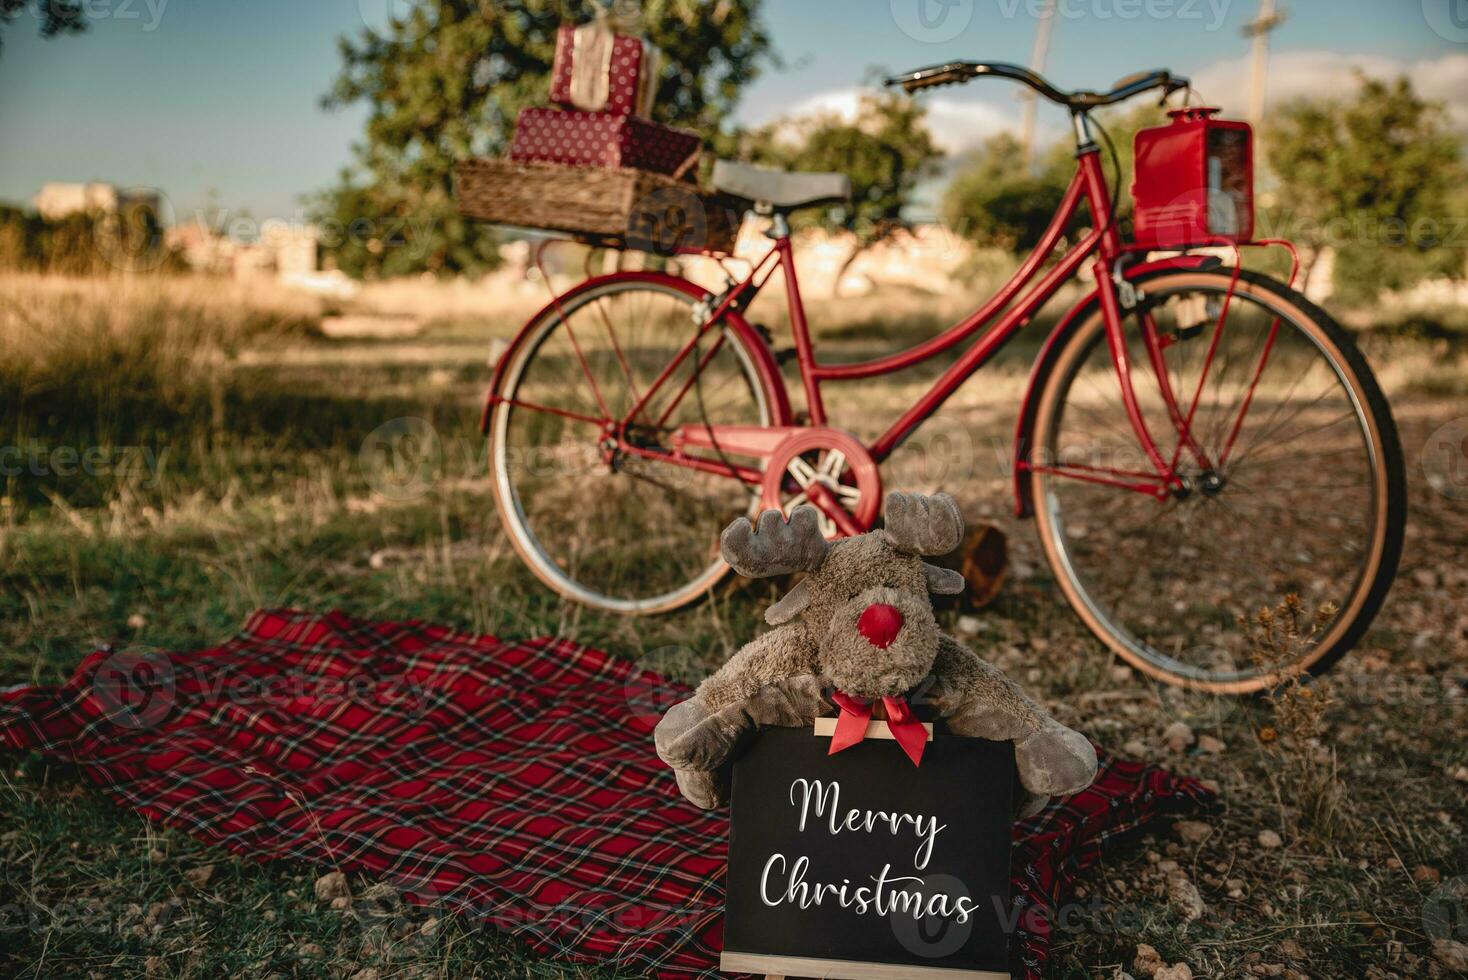 Outdoor Christmas session with bicycle with gifts photo